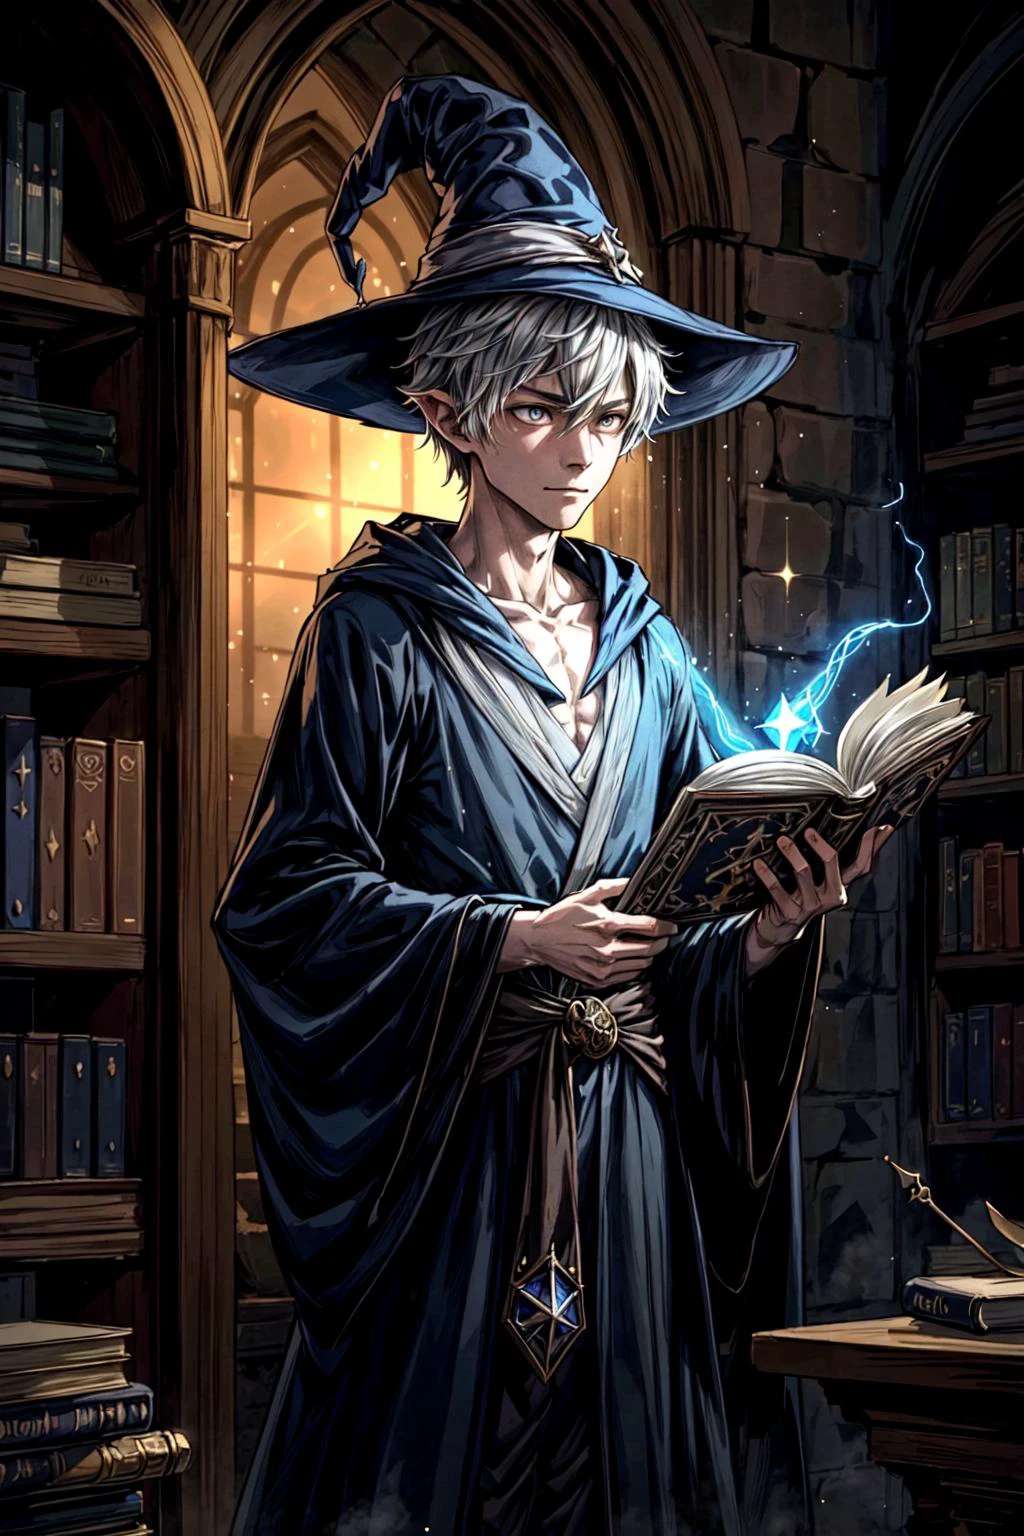 1boy, a thin and mysterious wizard wearing a robe and a hat, casting a spell in a tower with a wand and a scroll, books and potions in the background, arcane and mysterious style, sparkling spells in air, fanciful energy, cinematic lighting,